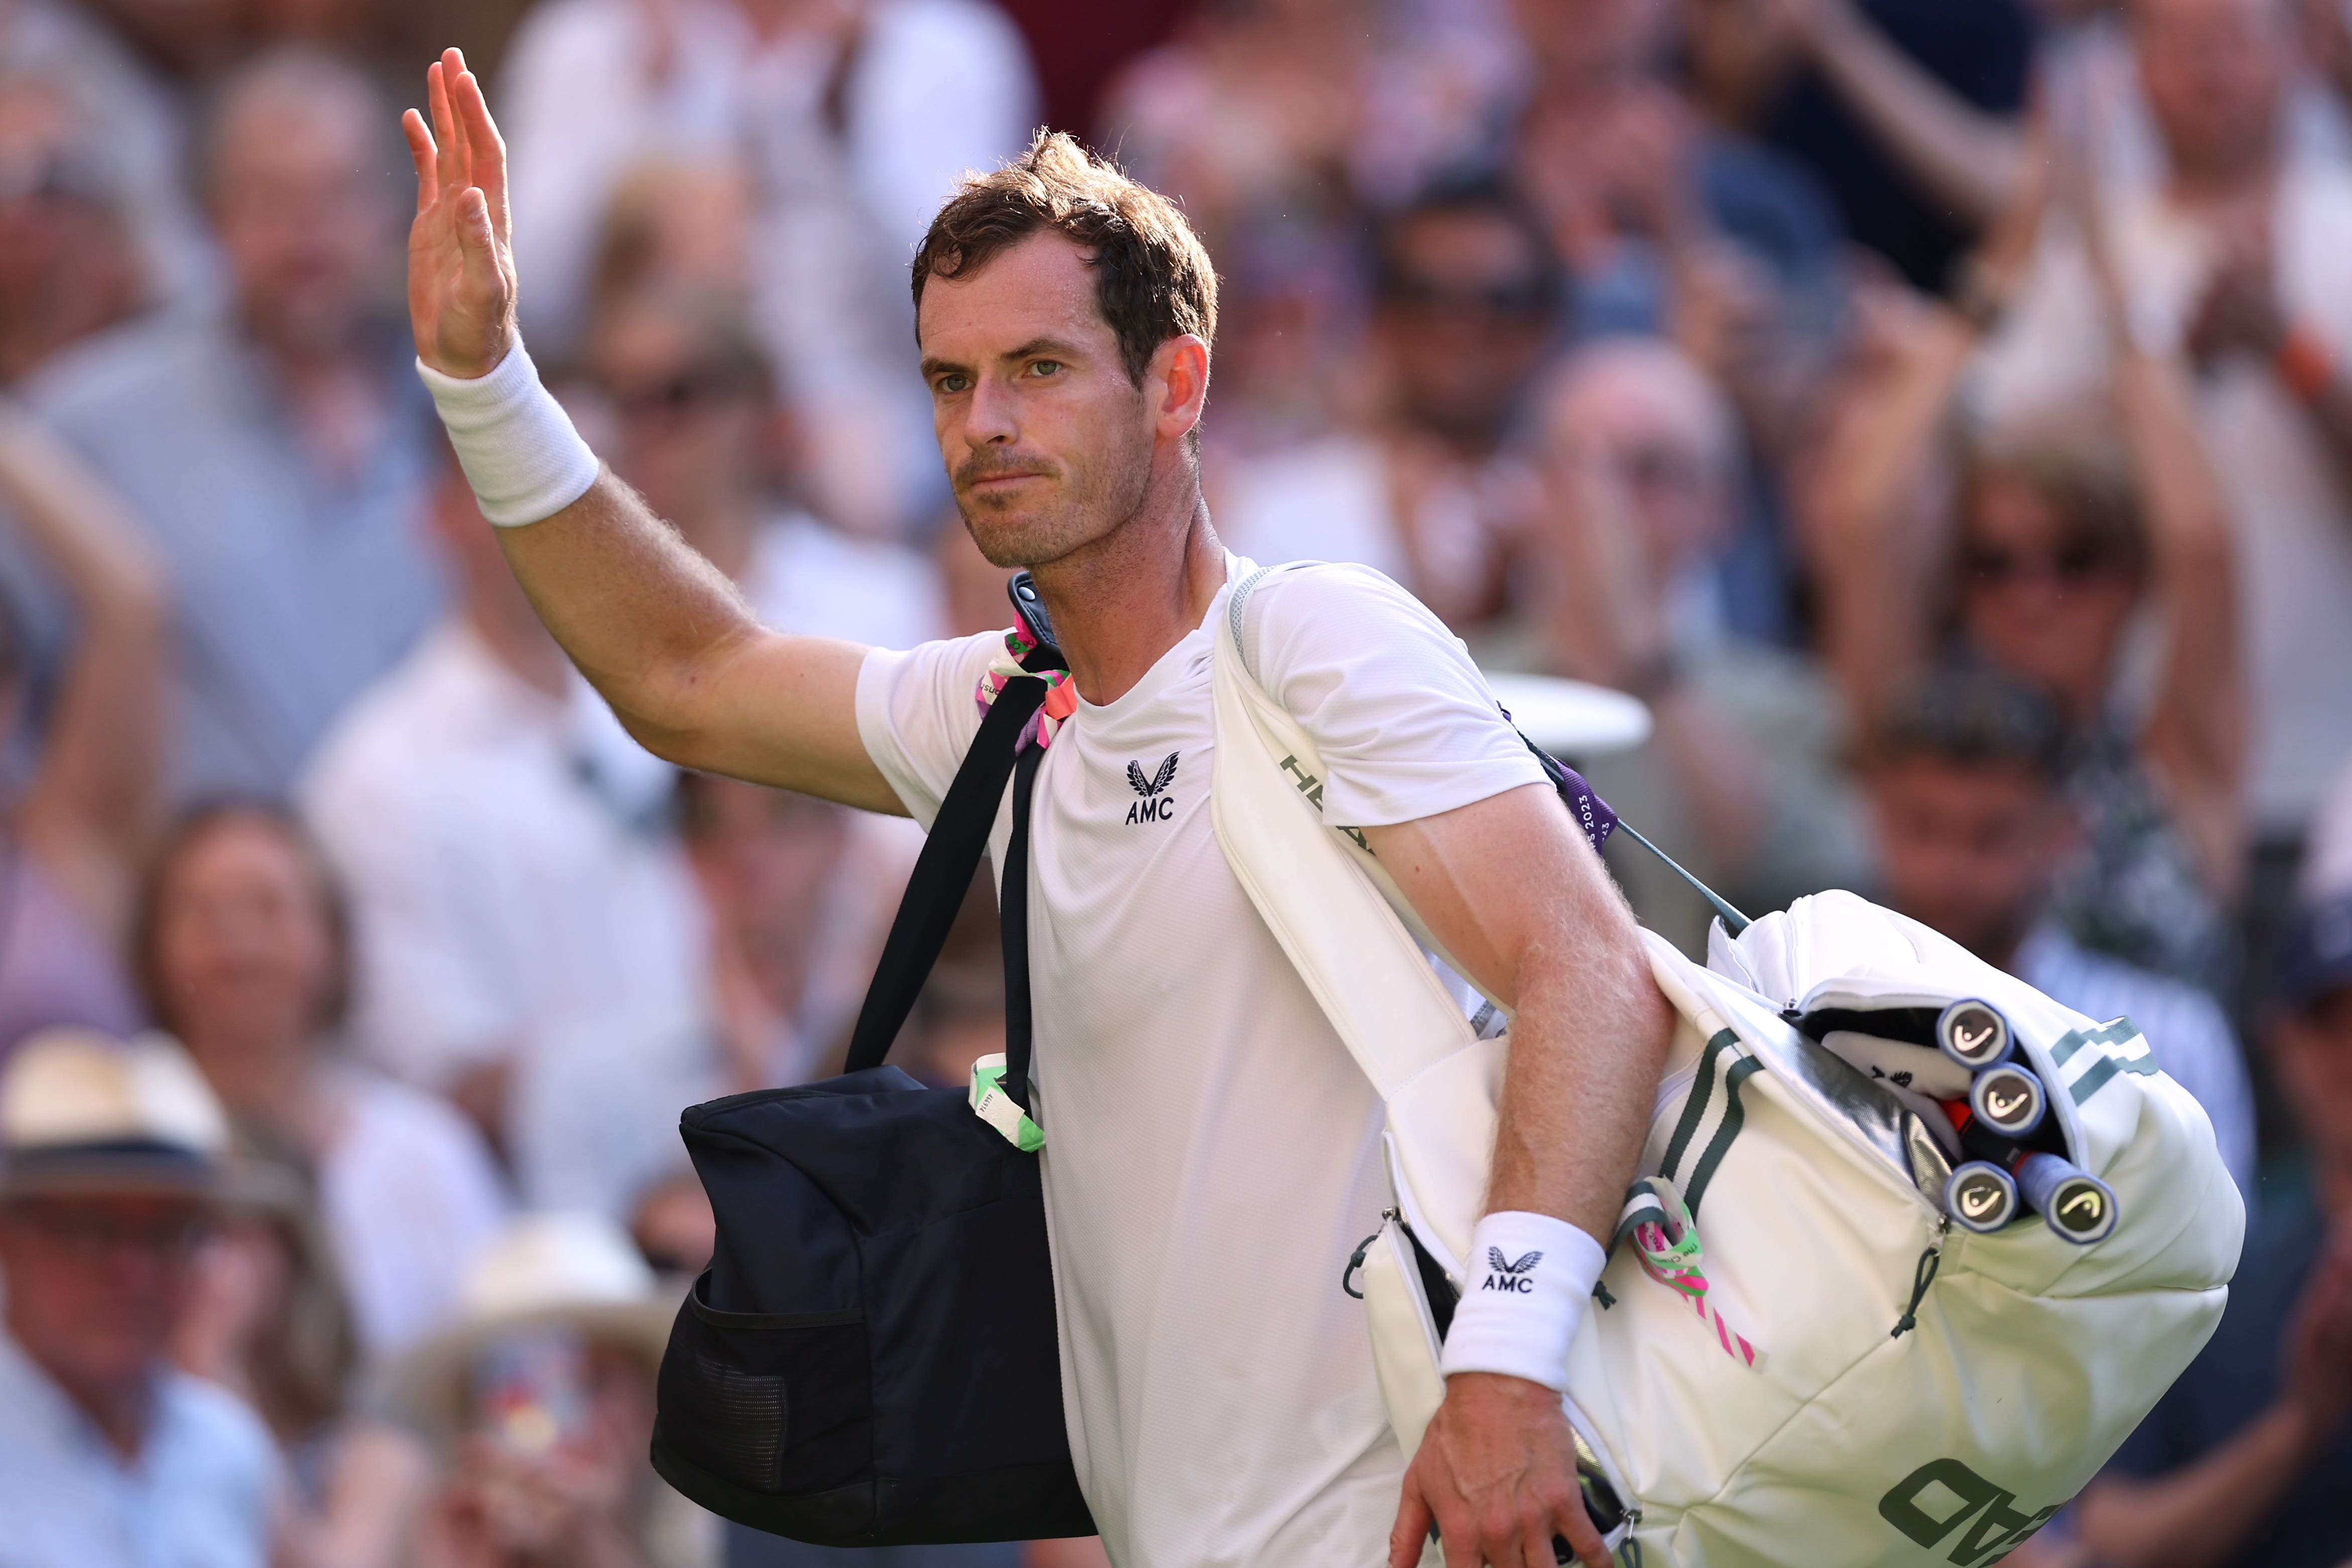 Andy Murray has withdrawn from the singles event at Wimbledon